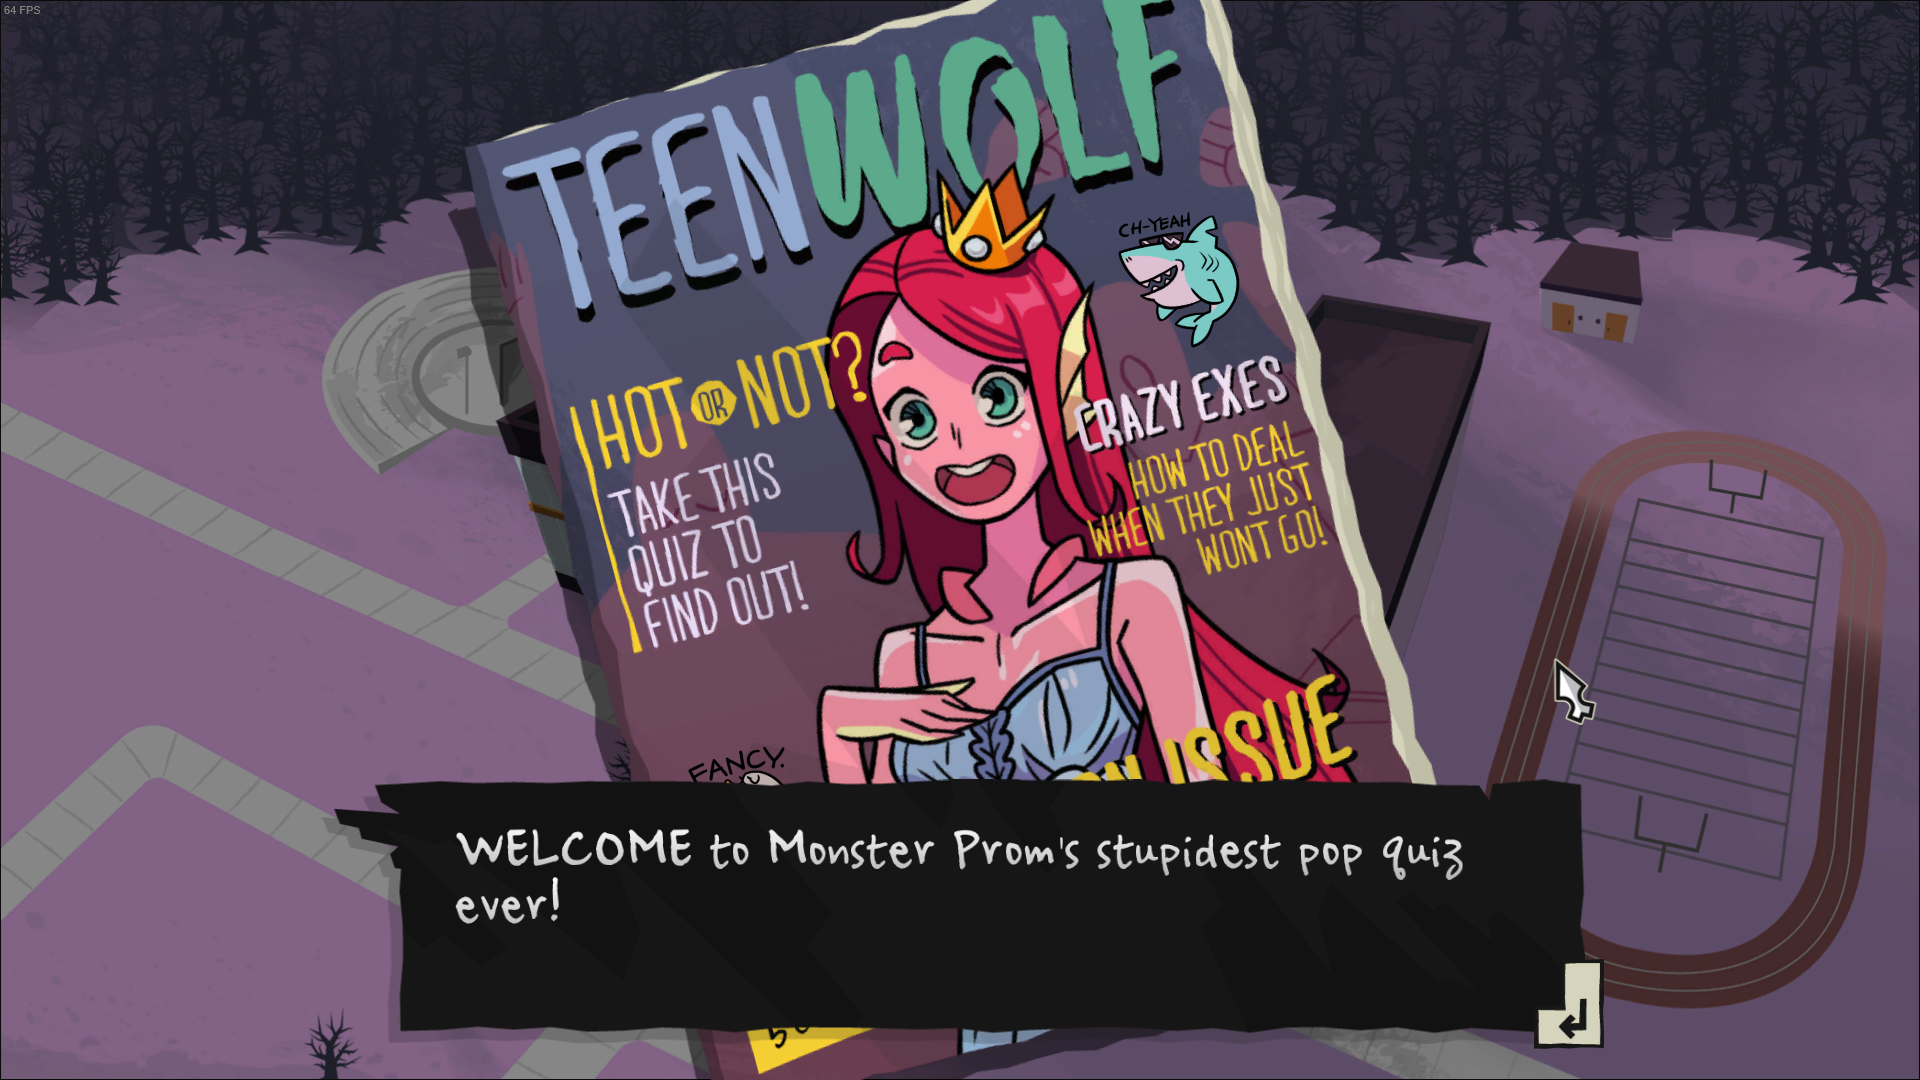 A teen wolf magazine where the player is promted to take a quiz.